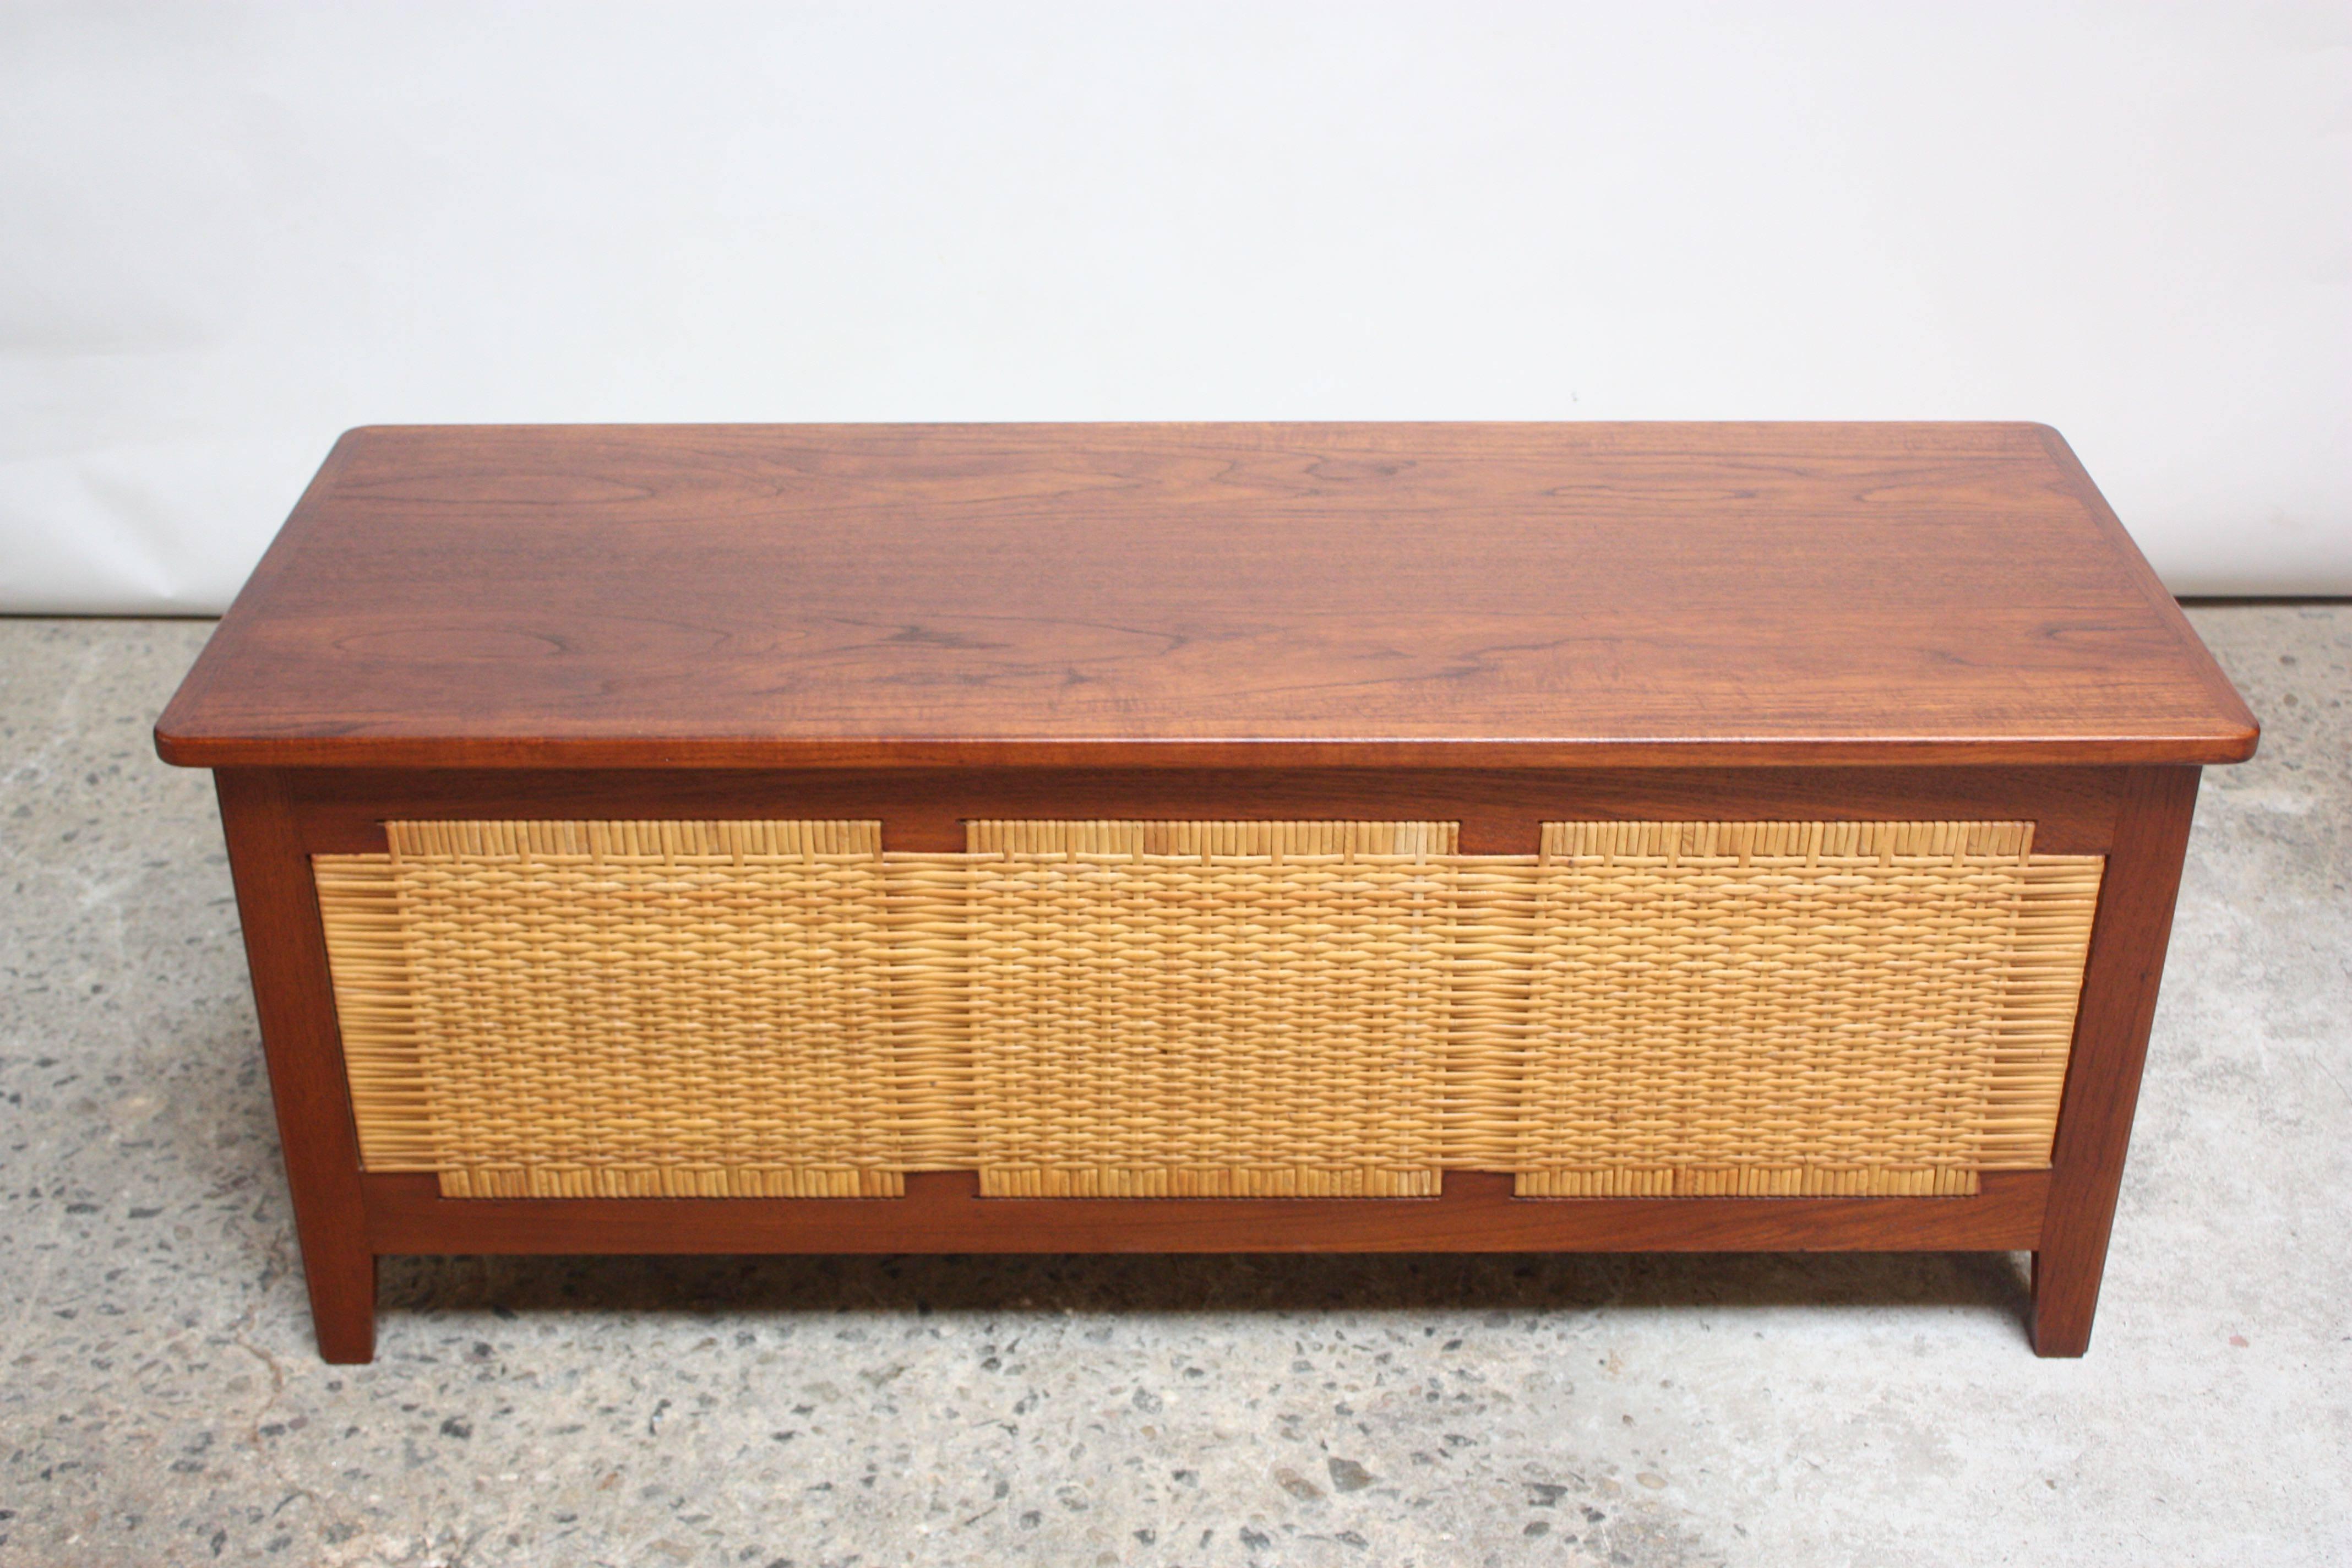 This blanket chest was designed in the 1960s by Kaj Winding for Poul Hundevad. This model was manufactured in two sizes (36